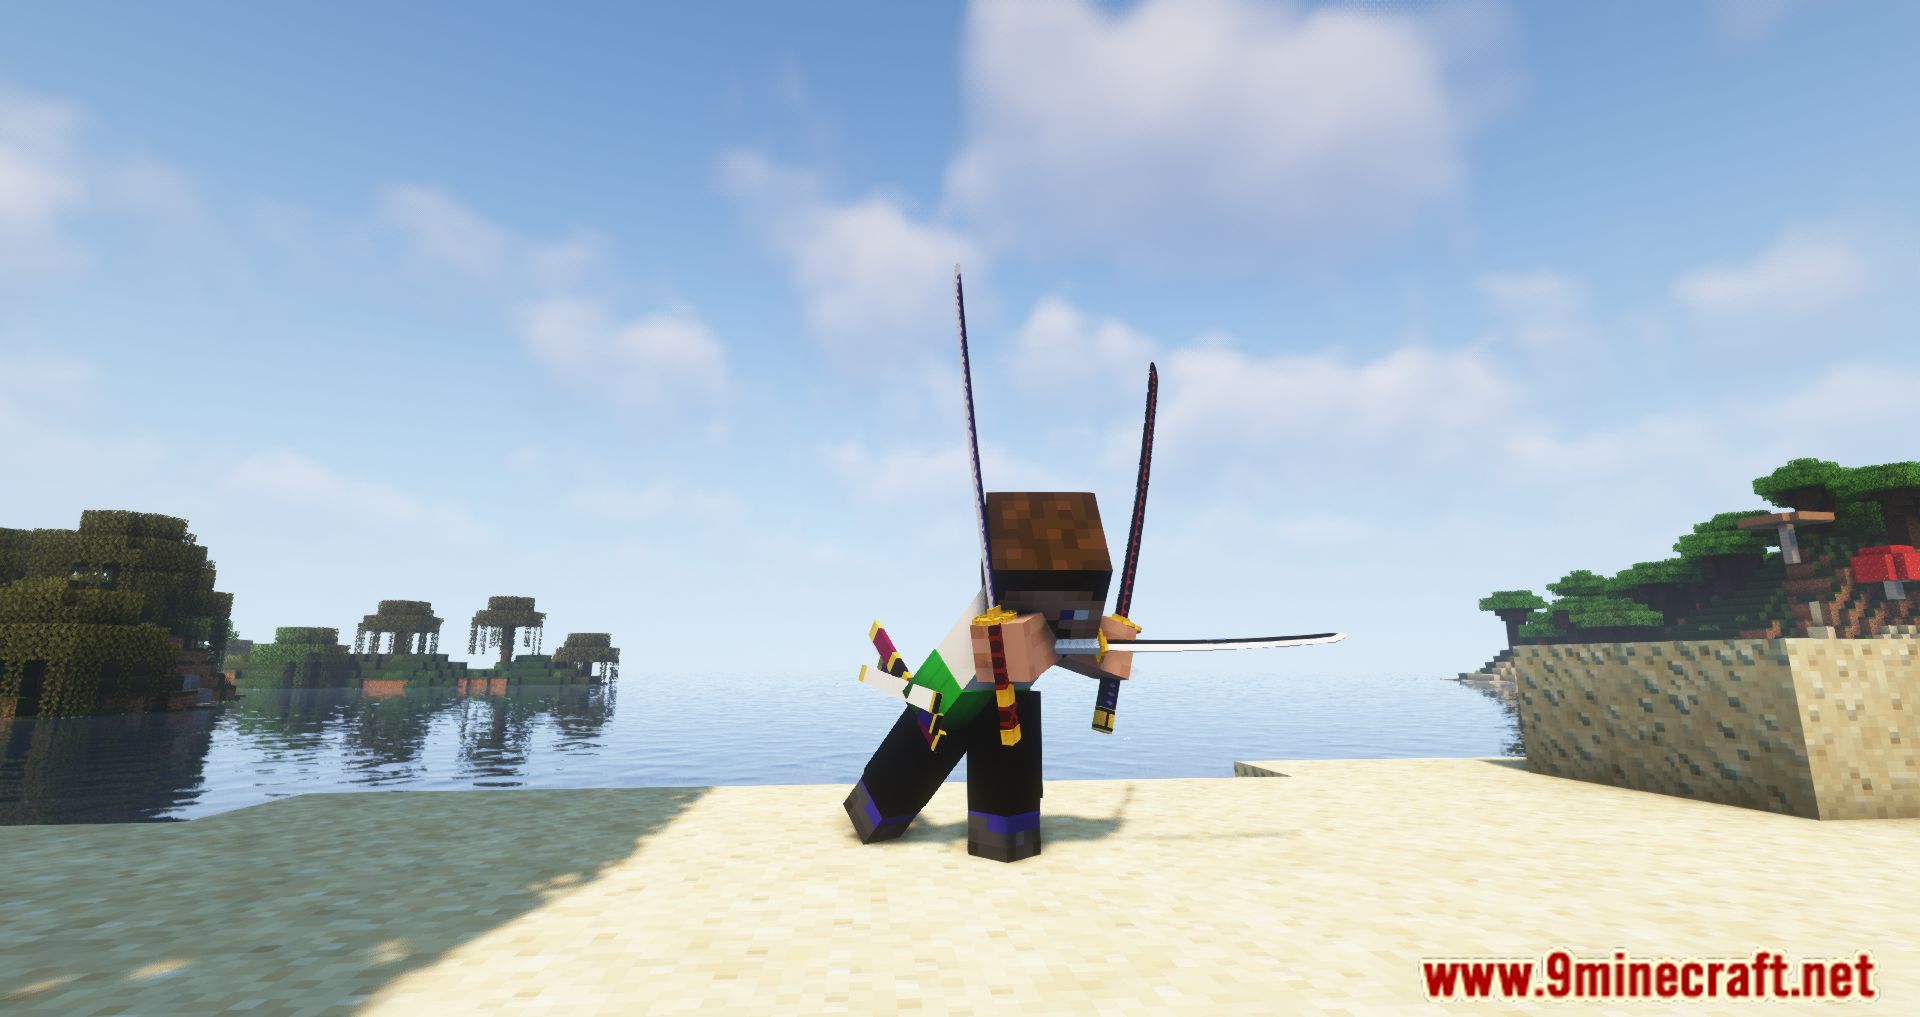 One Piece Weapons Mod (1.16.5) - Become A Pirate And Find One Piece 18